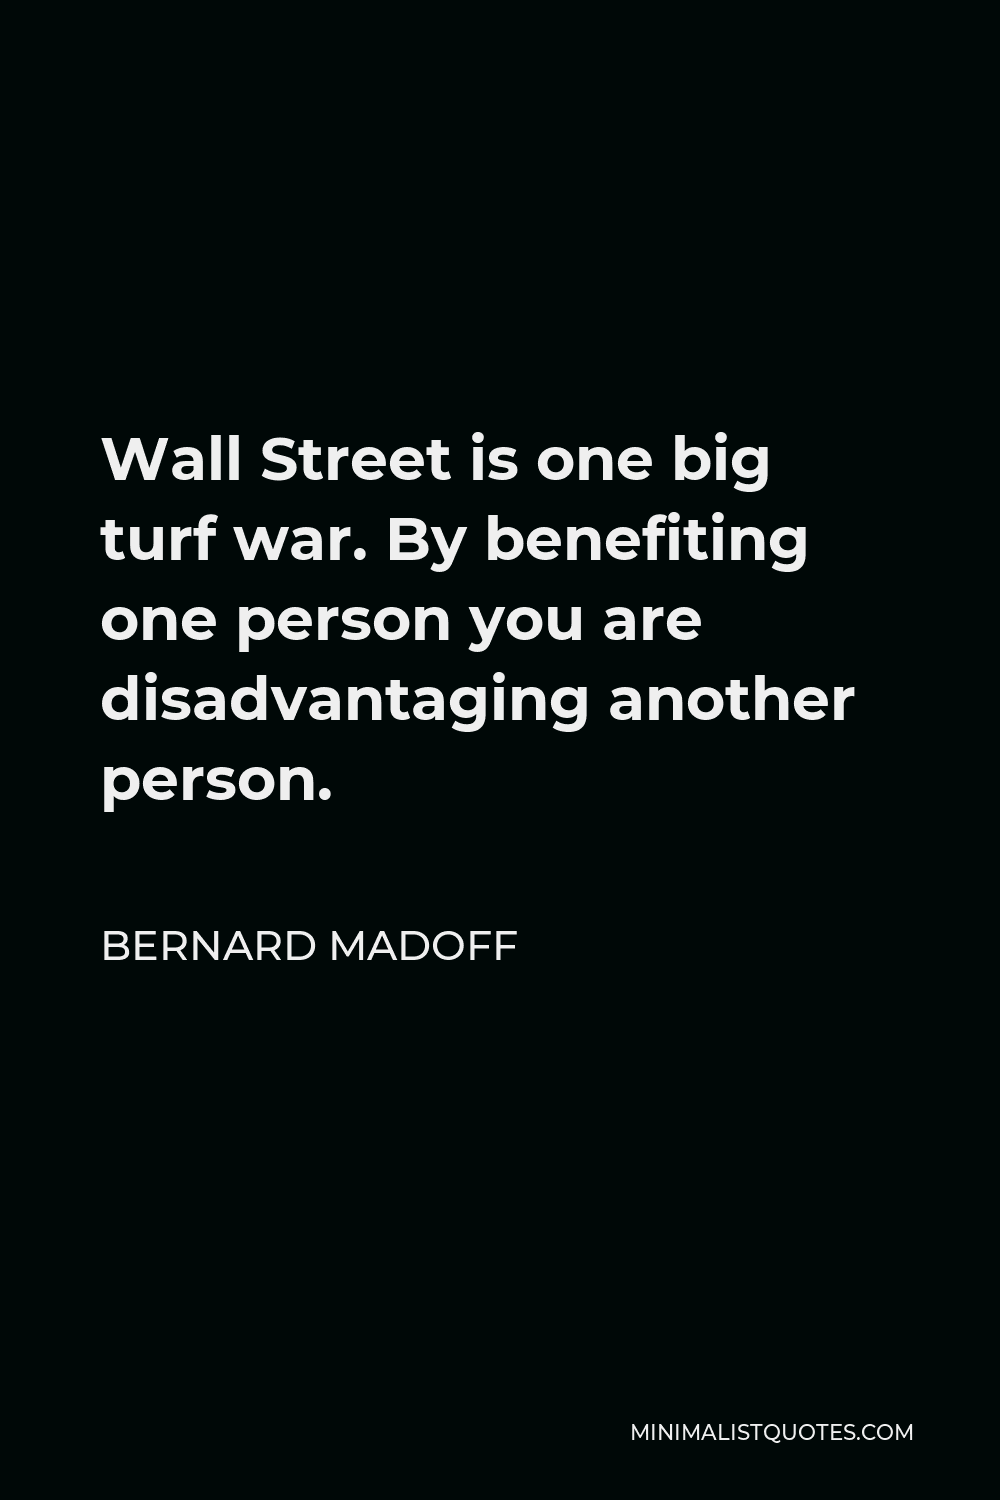 Bernard Madoff Quote - Wall Street is one big turf war. By benefiting one person you are disadvantaging another person.